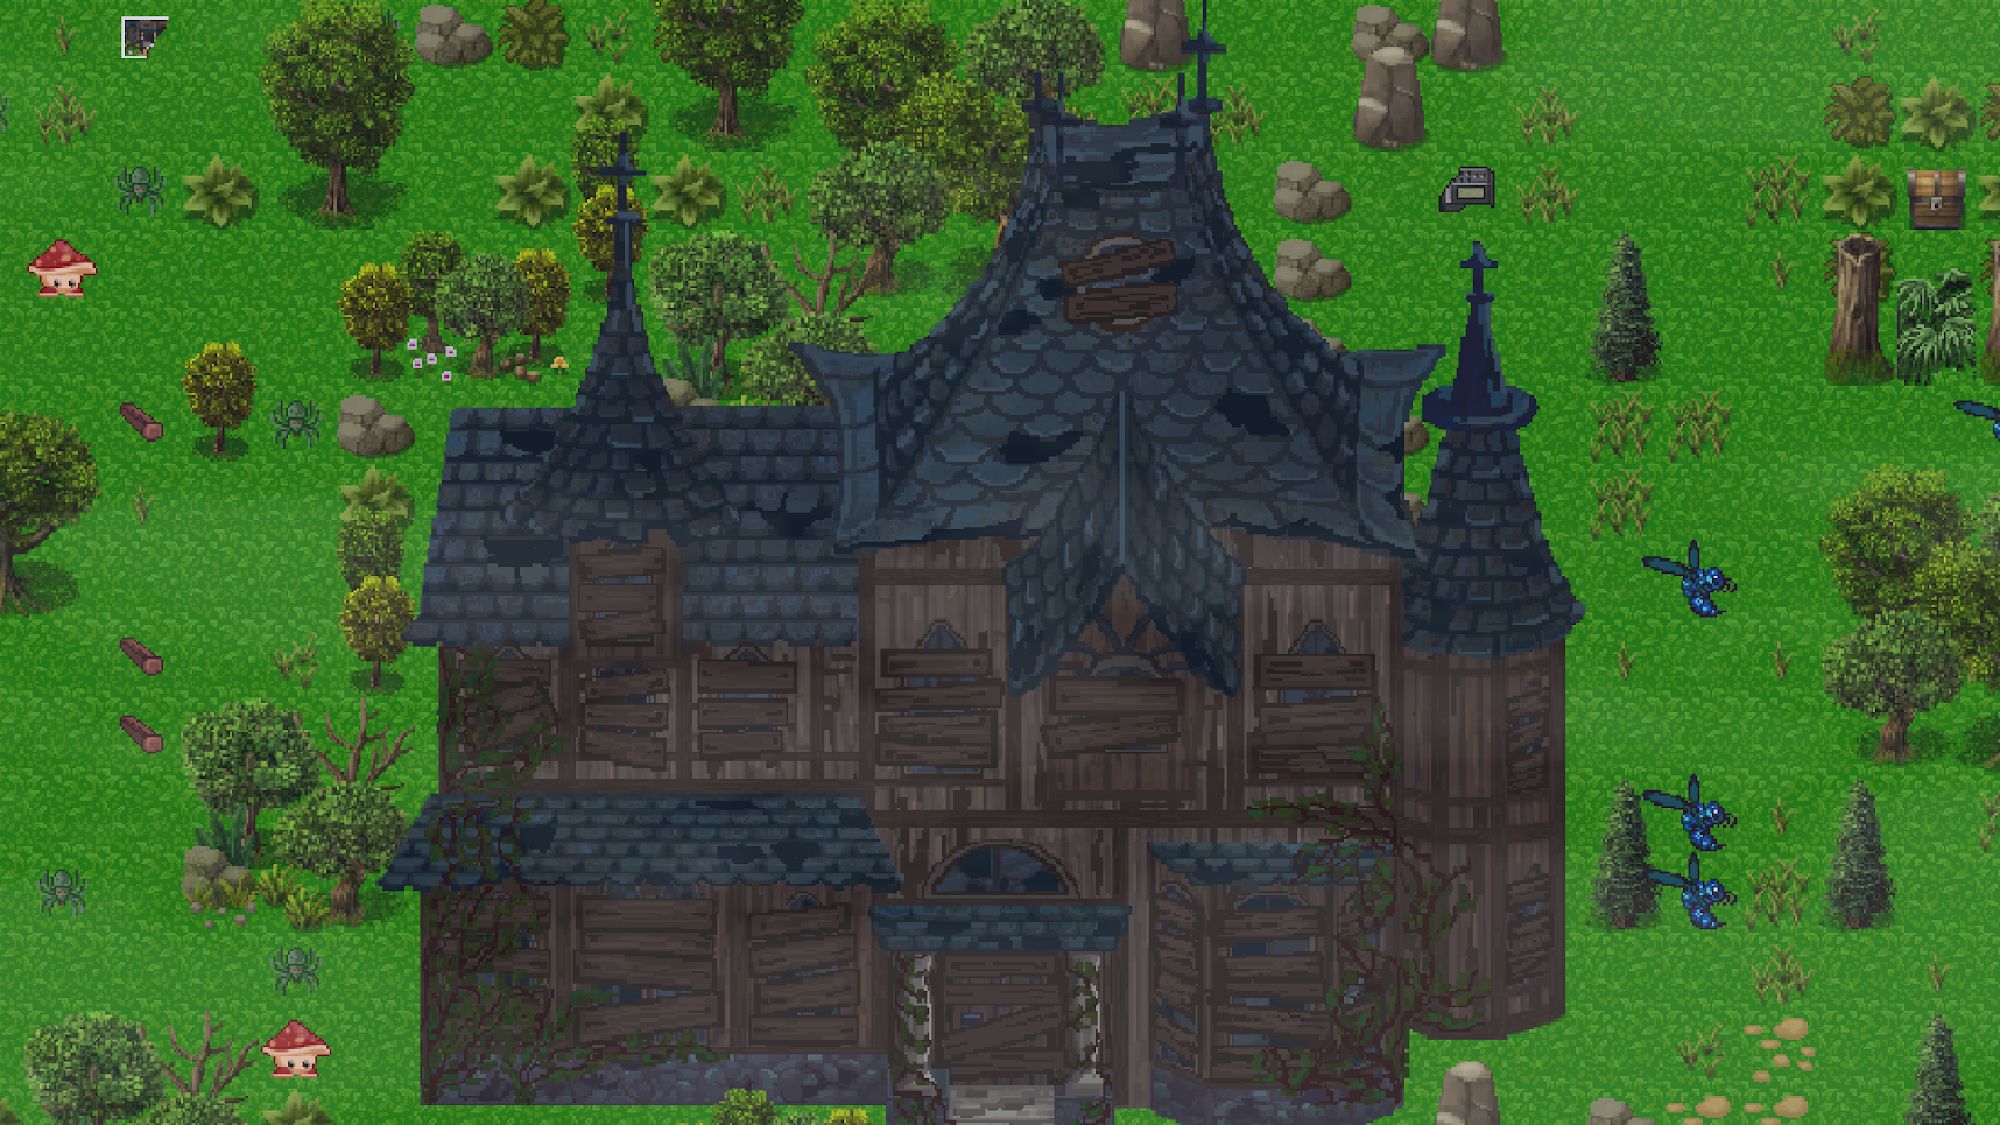 Download Survival RPG 4: Haunted Manor Android free game.